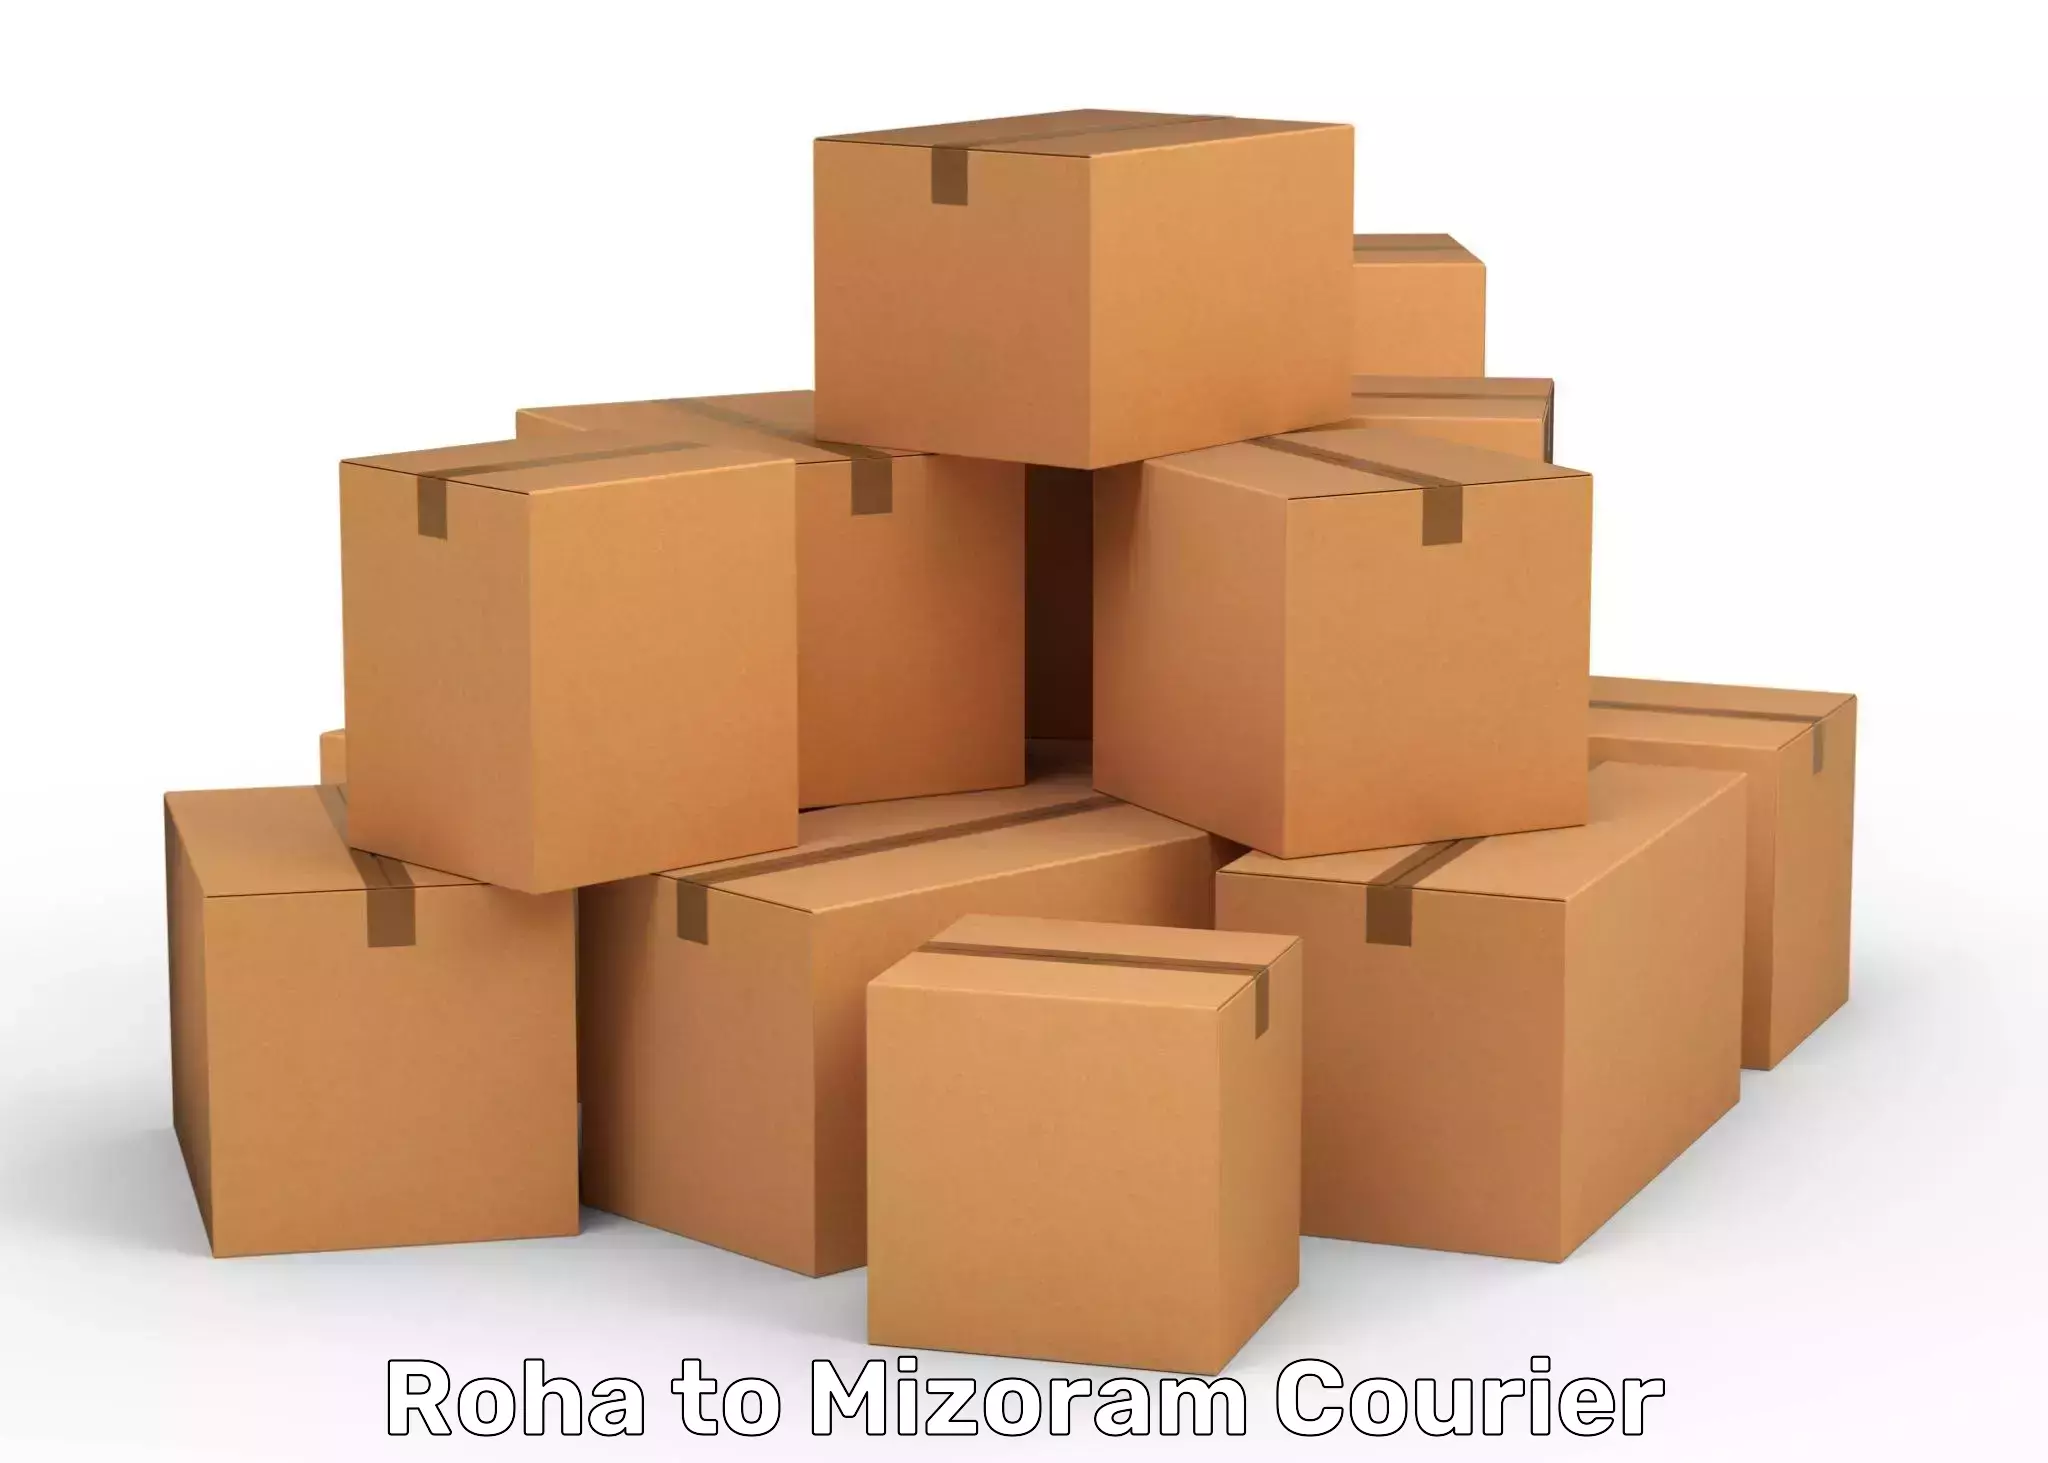 Parcel service for businesses Roha to Mizoram